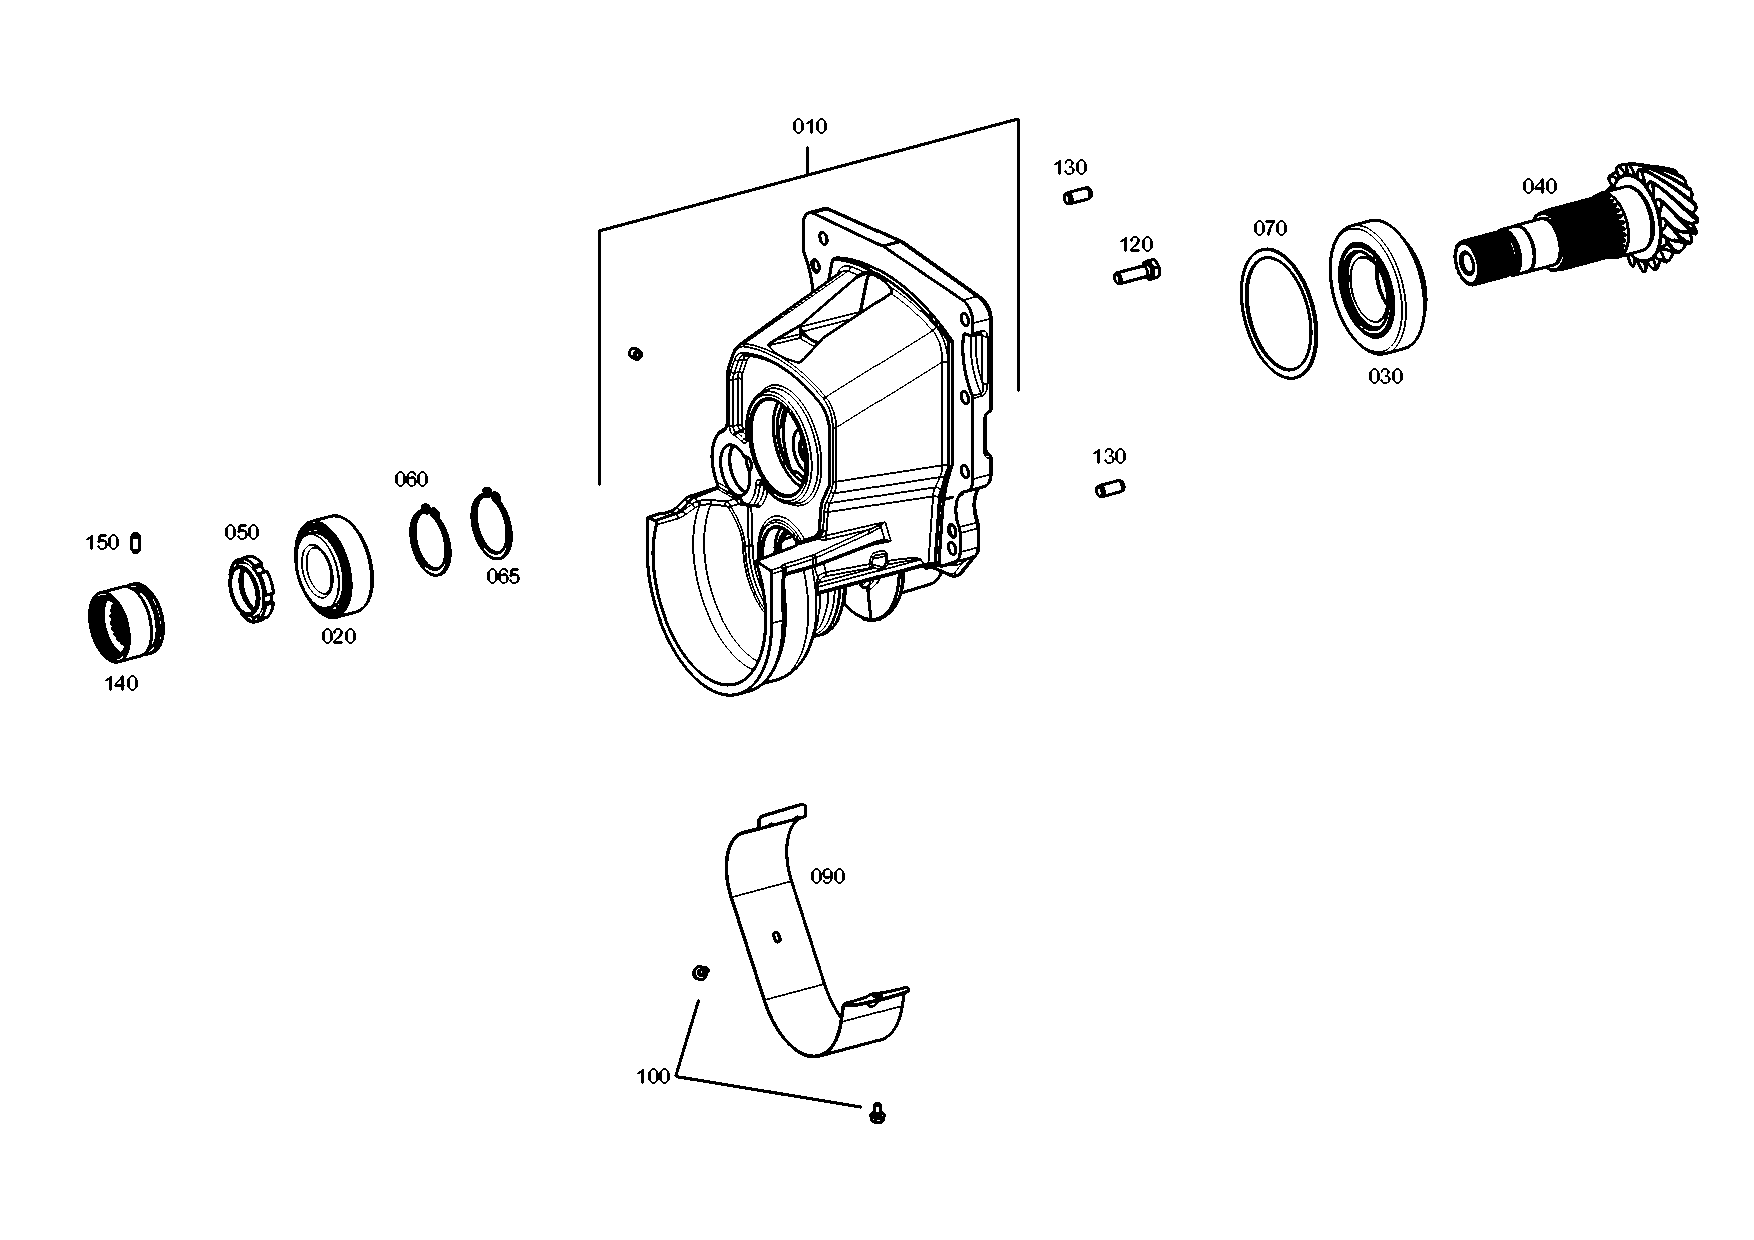 drawing for LUNA EQUIPOS INDUSTRIEALES, S.A. 199118250357 - ADJUSTMENT PLATE (figure 3)